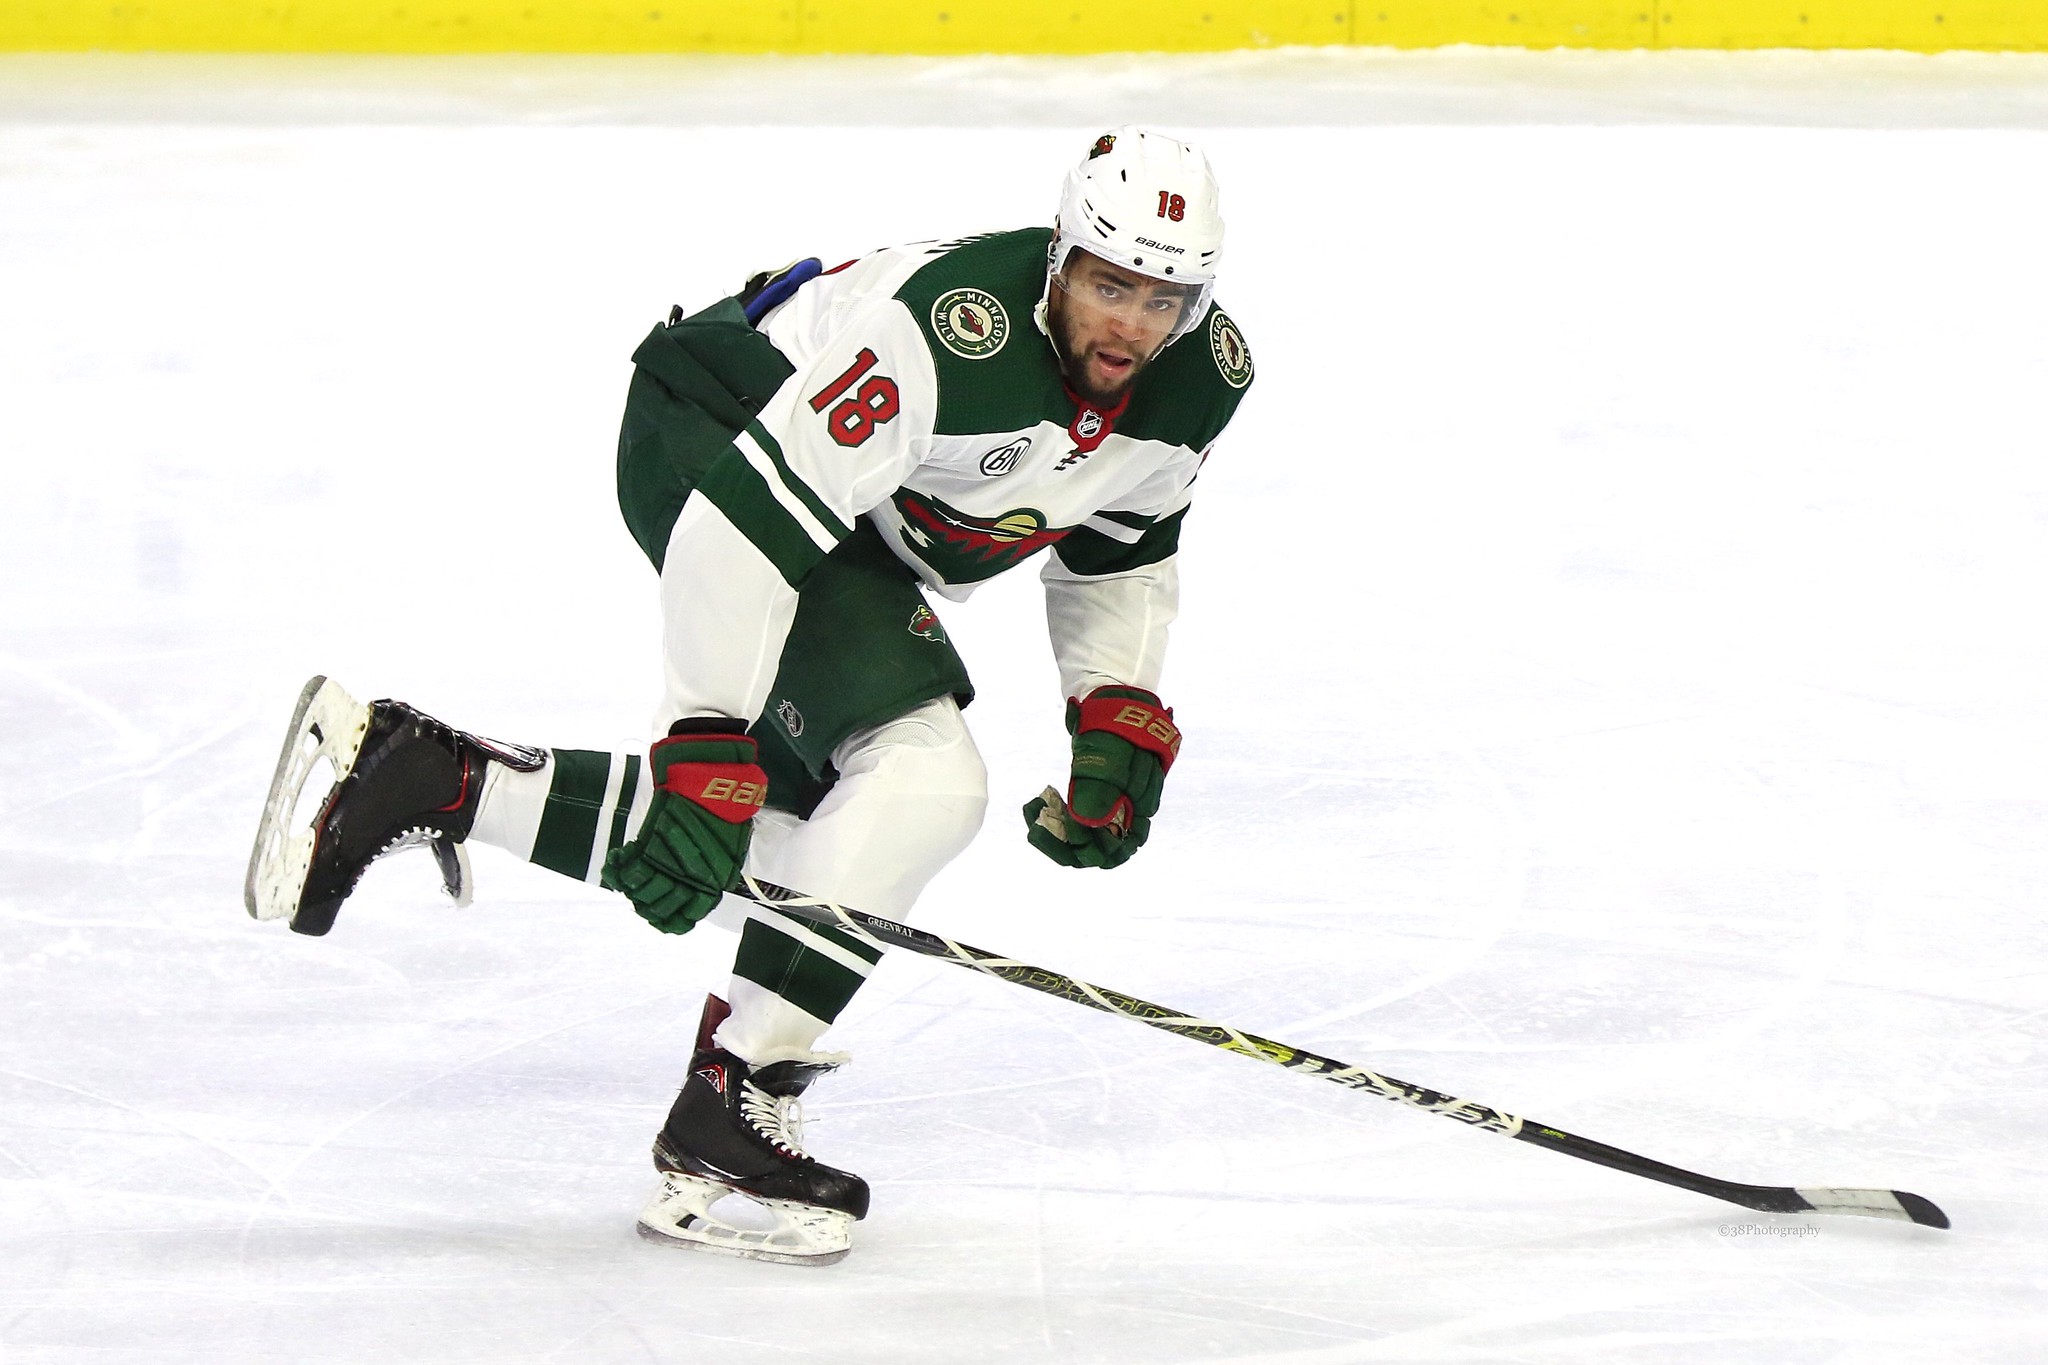 In an elevated role, Wild's Jordan Greenway vows to use his size